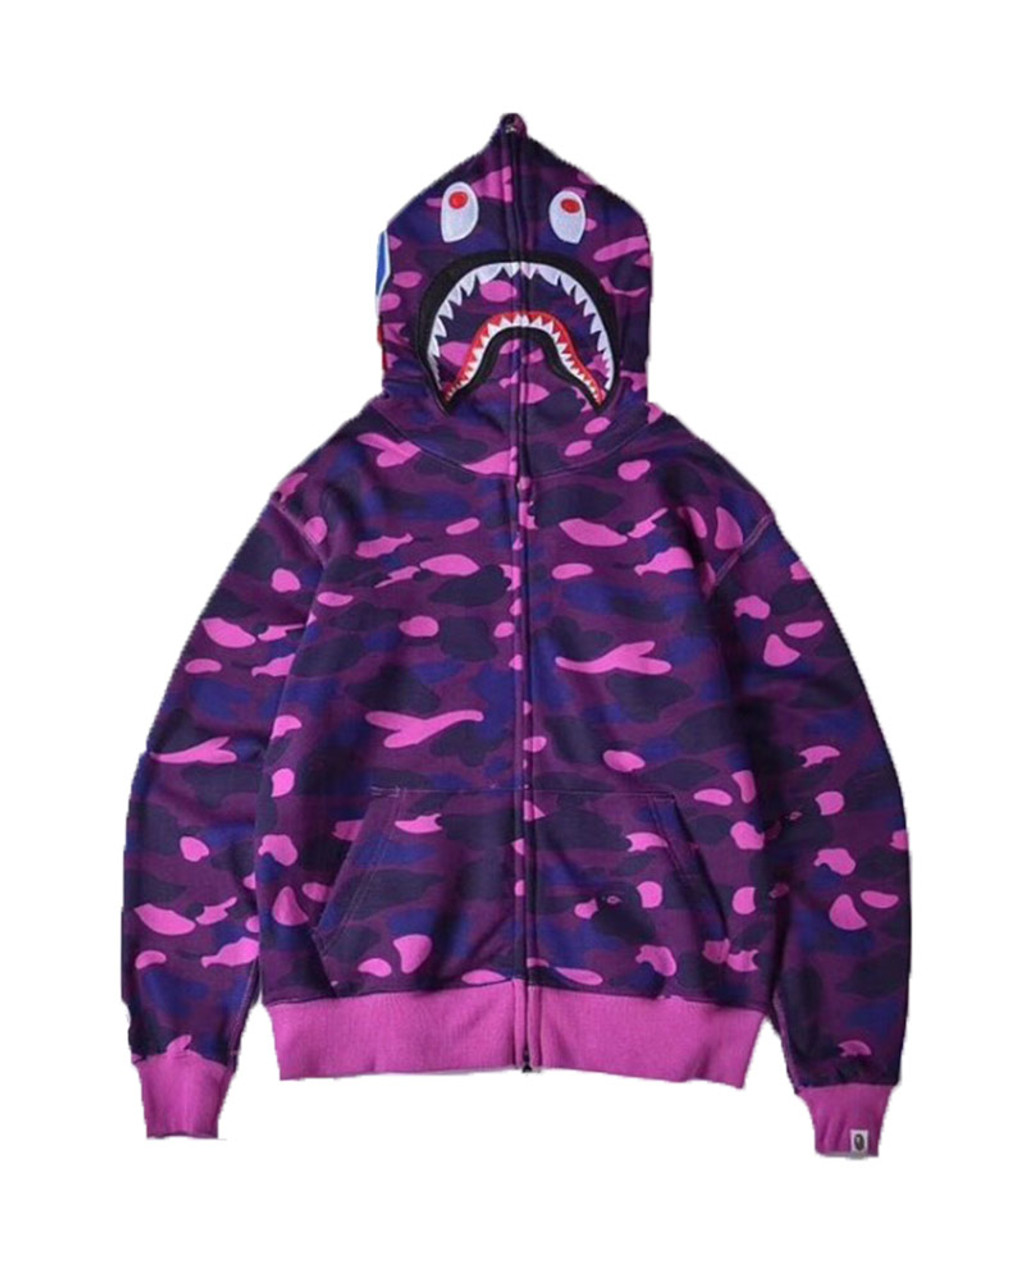 Bape shark hoodies - Buy the best product with free shipping on